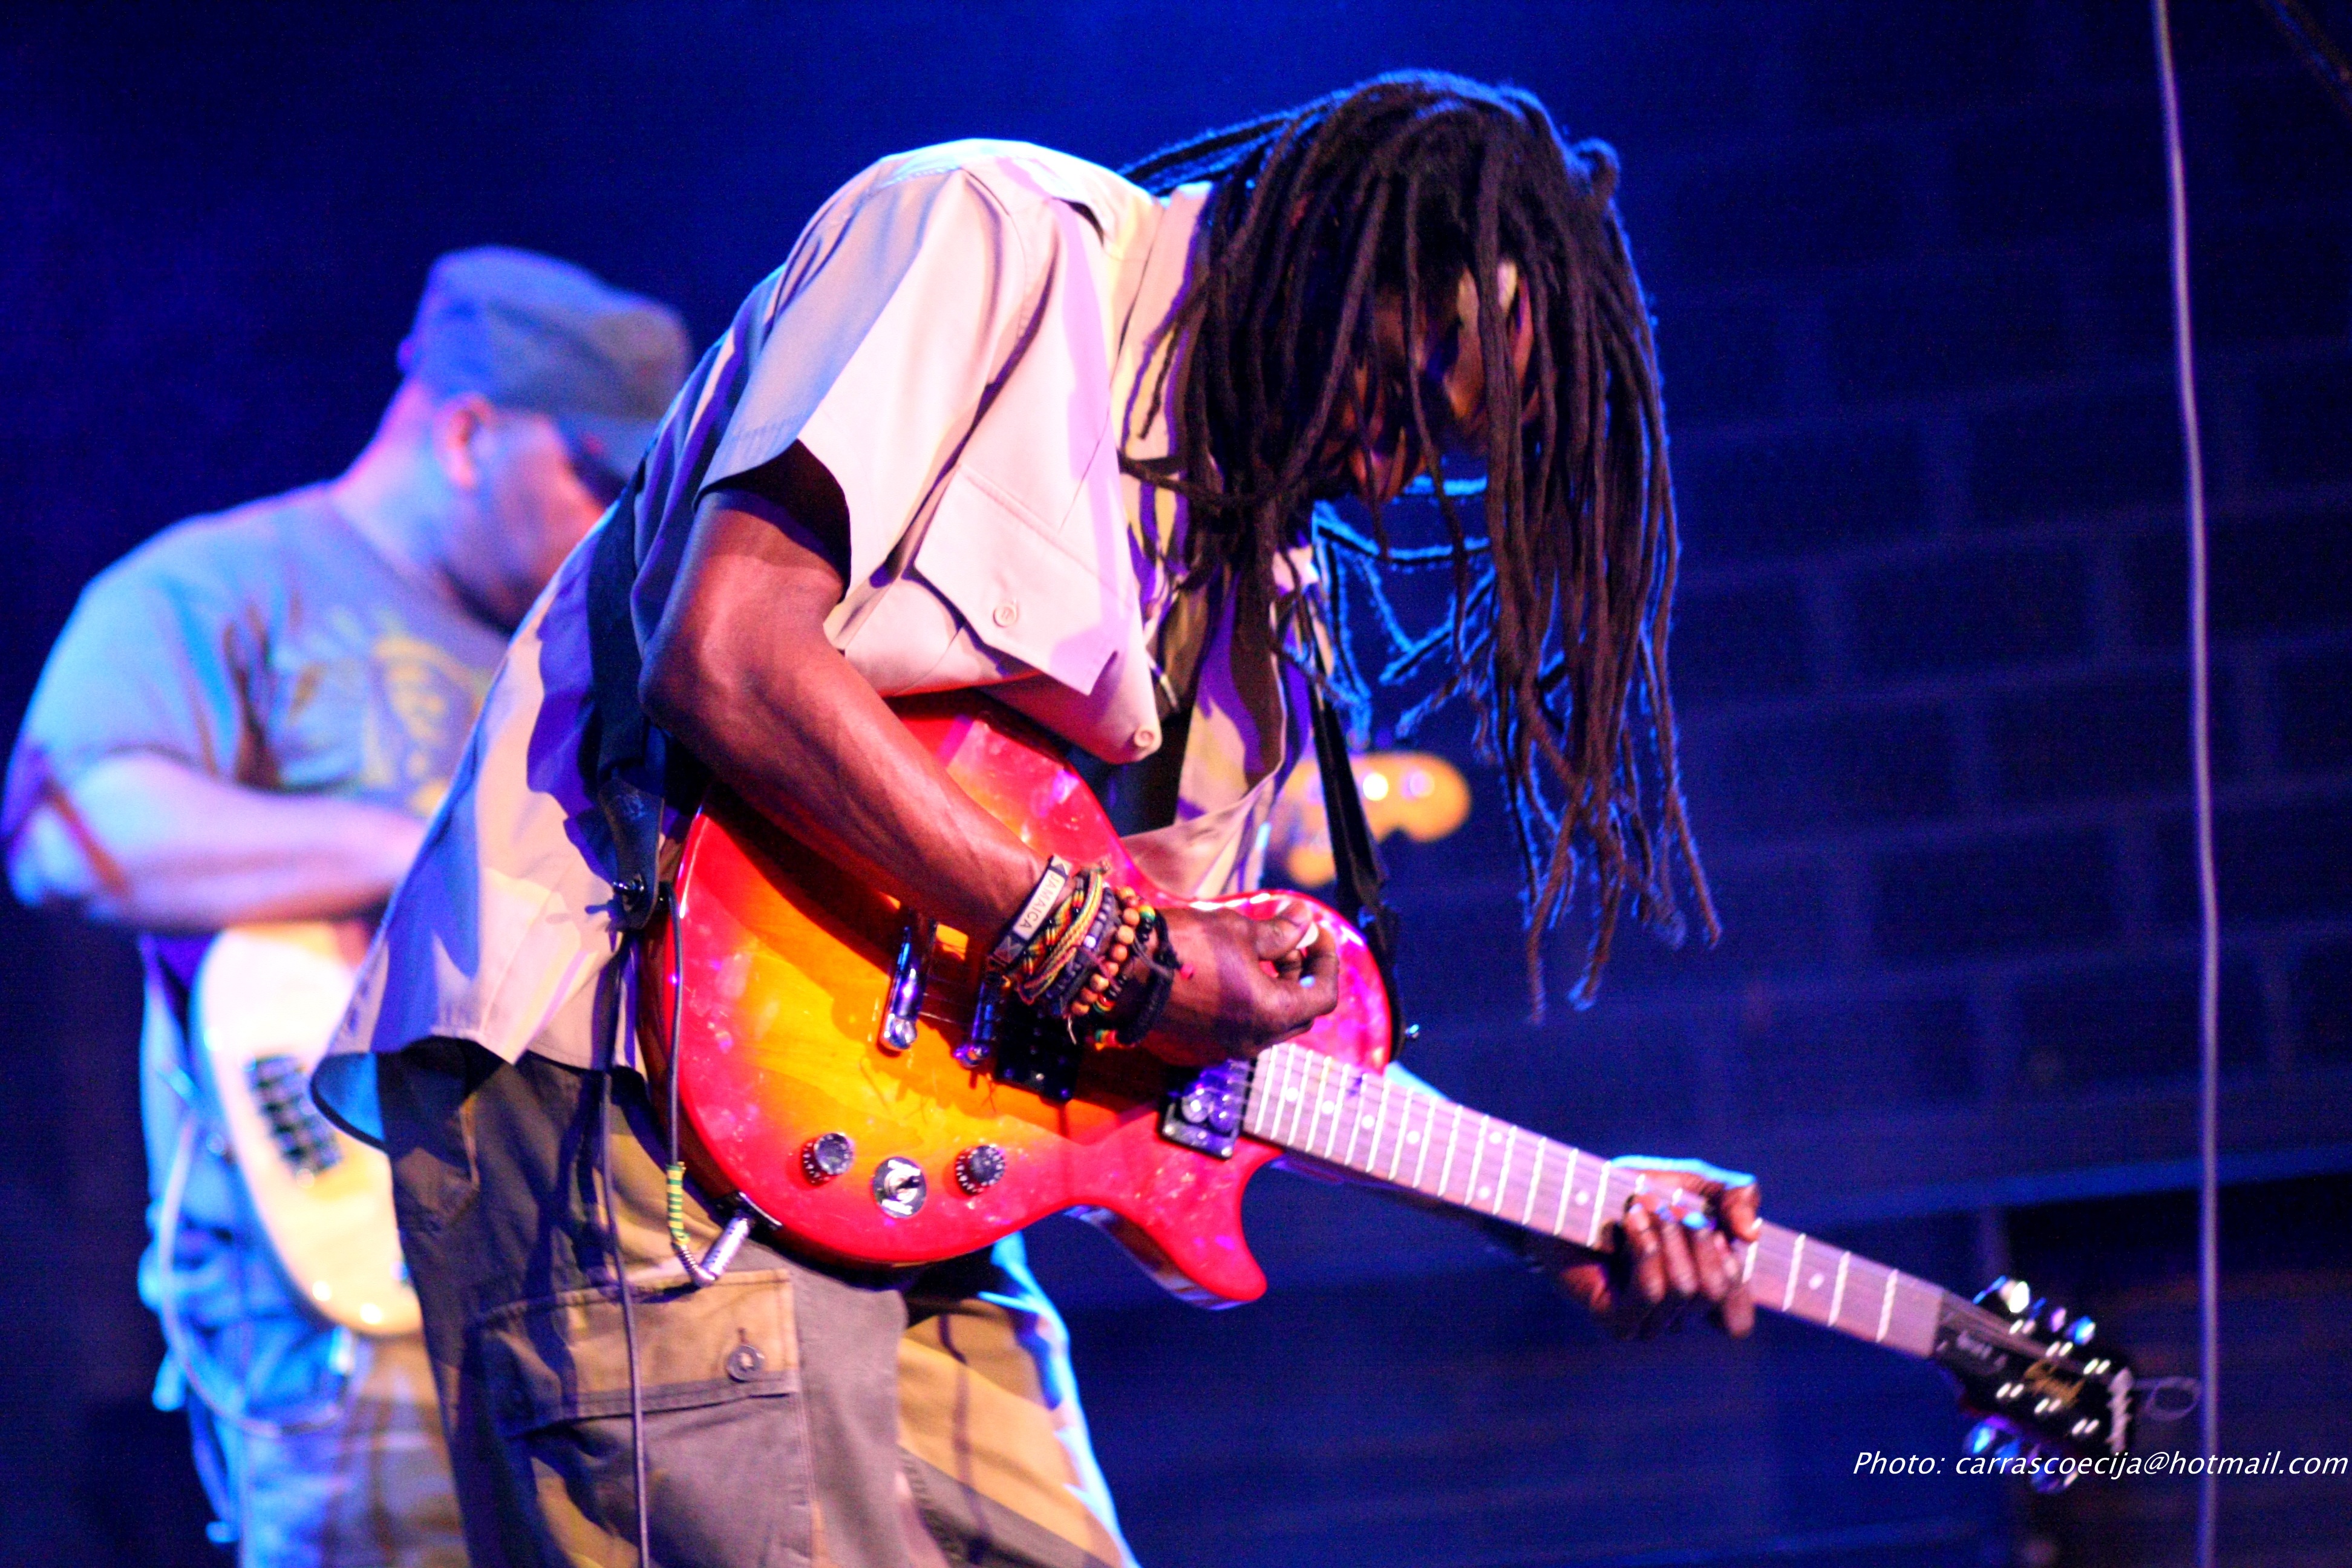 Legend: The Music of Bob Marley at the Victoria Theatre Halifax